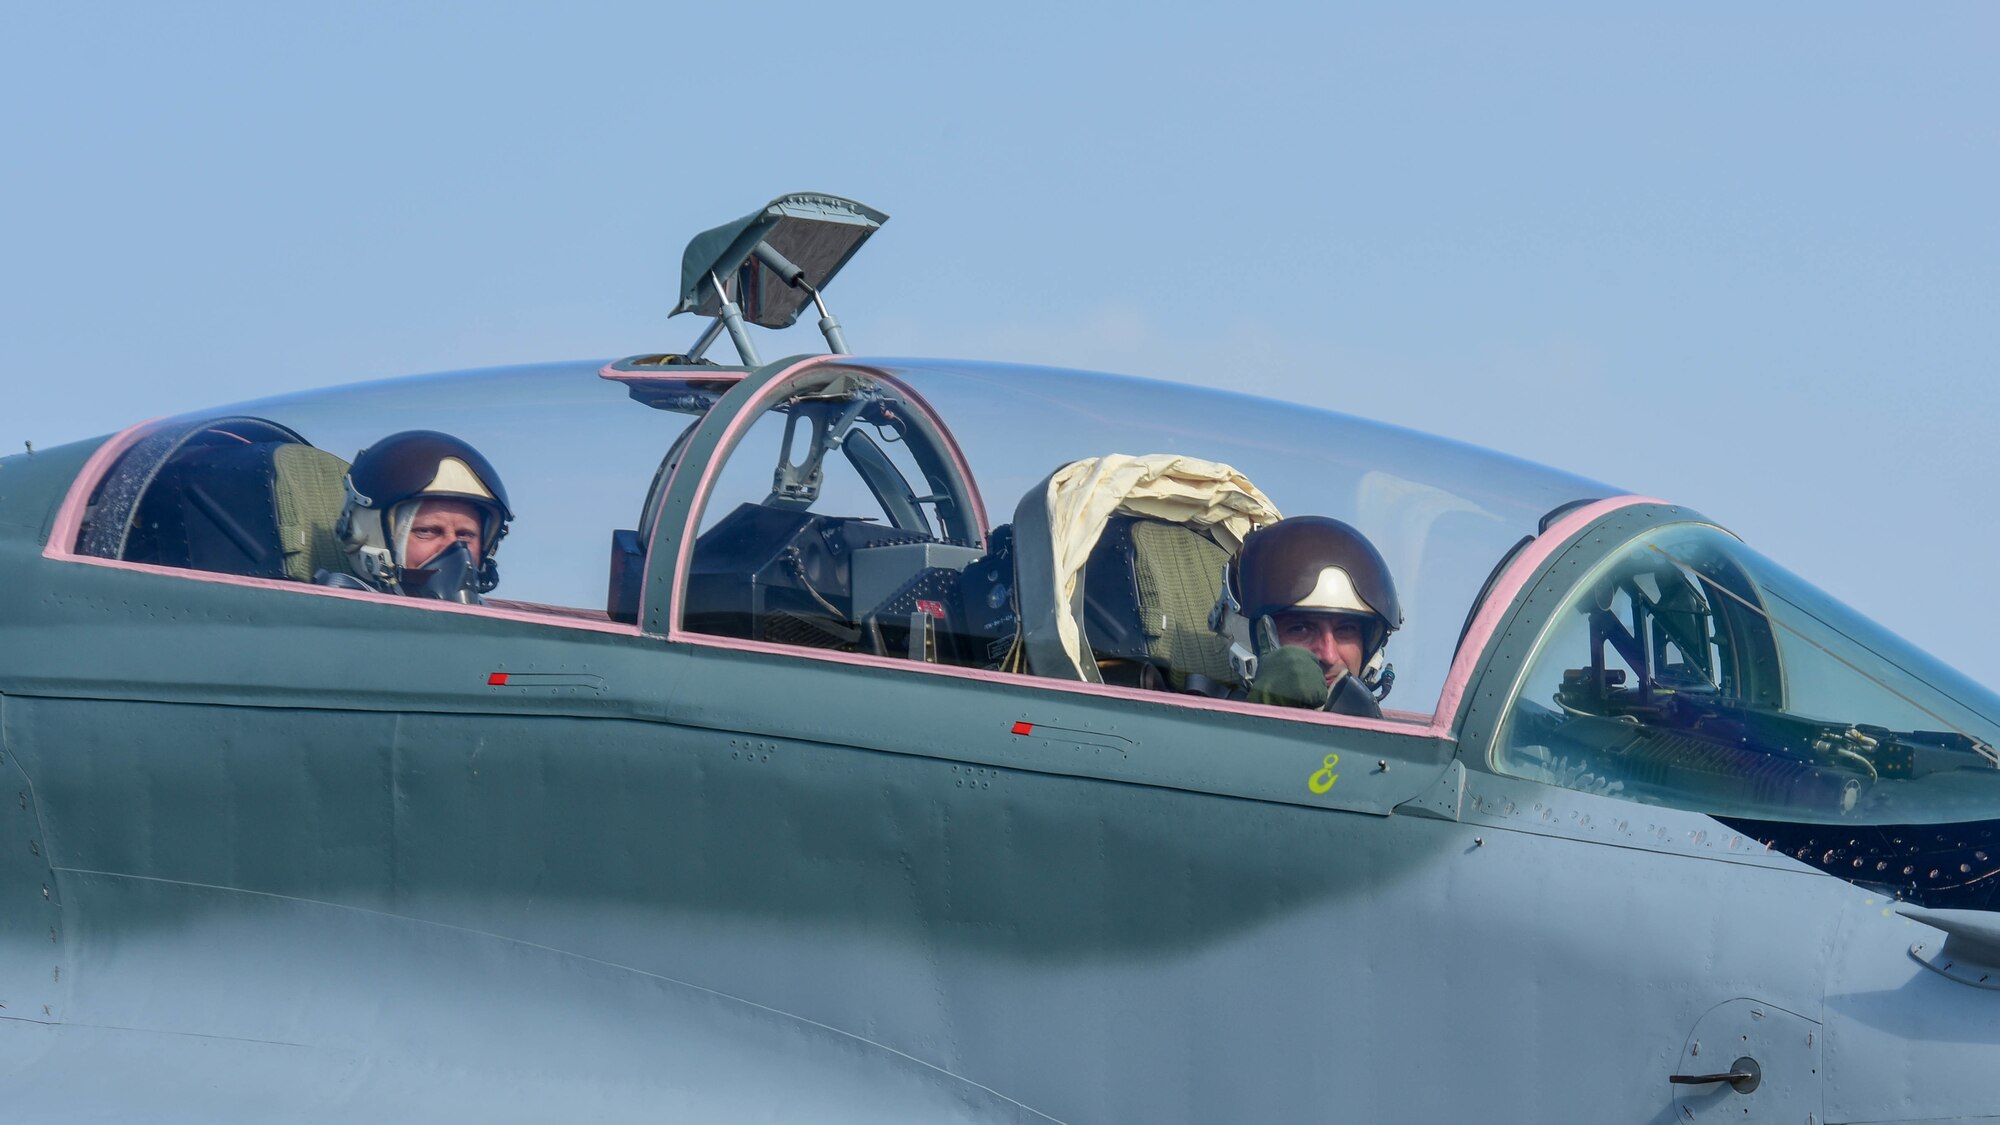 Bulgarian air force members prepare to taxi on the flightline during Thracian Star 21 at Graf Ignatievo Air Base, Bulgaria, July 20, 2021. The Bulgarian air force has approximately 80 aircraft and 6,500 active duty personnel. (U.S. Air Force photo by Airman 1st Class Brooke Moeder)